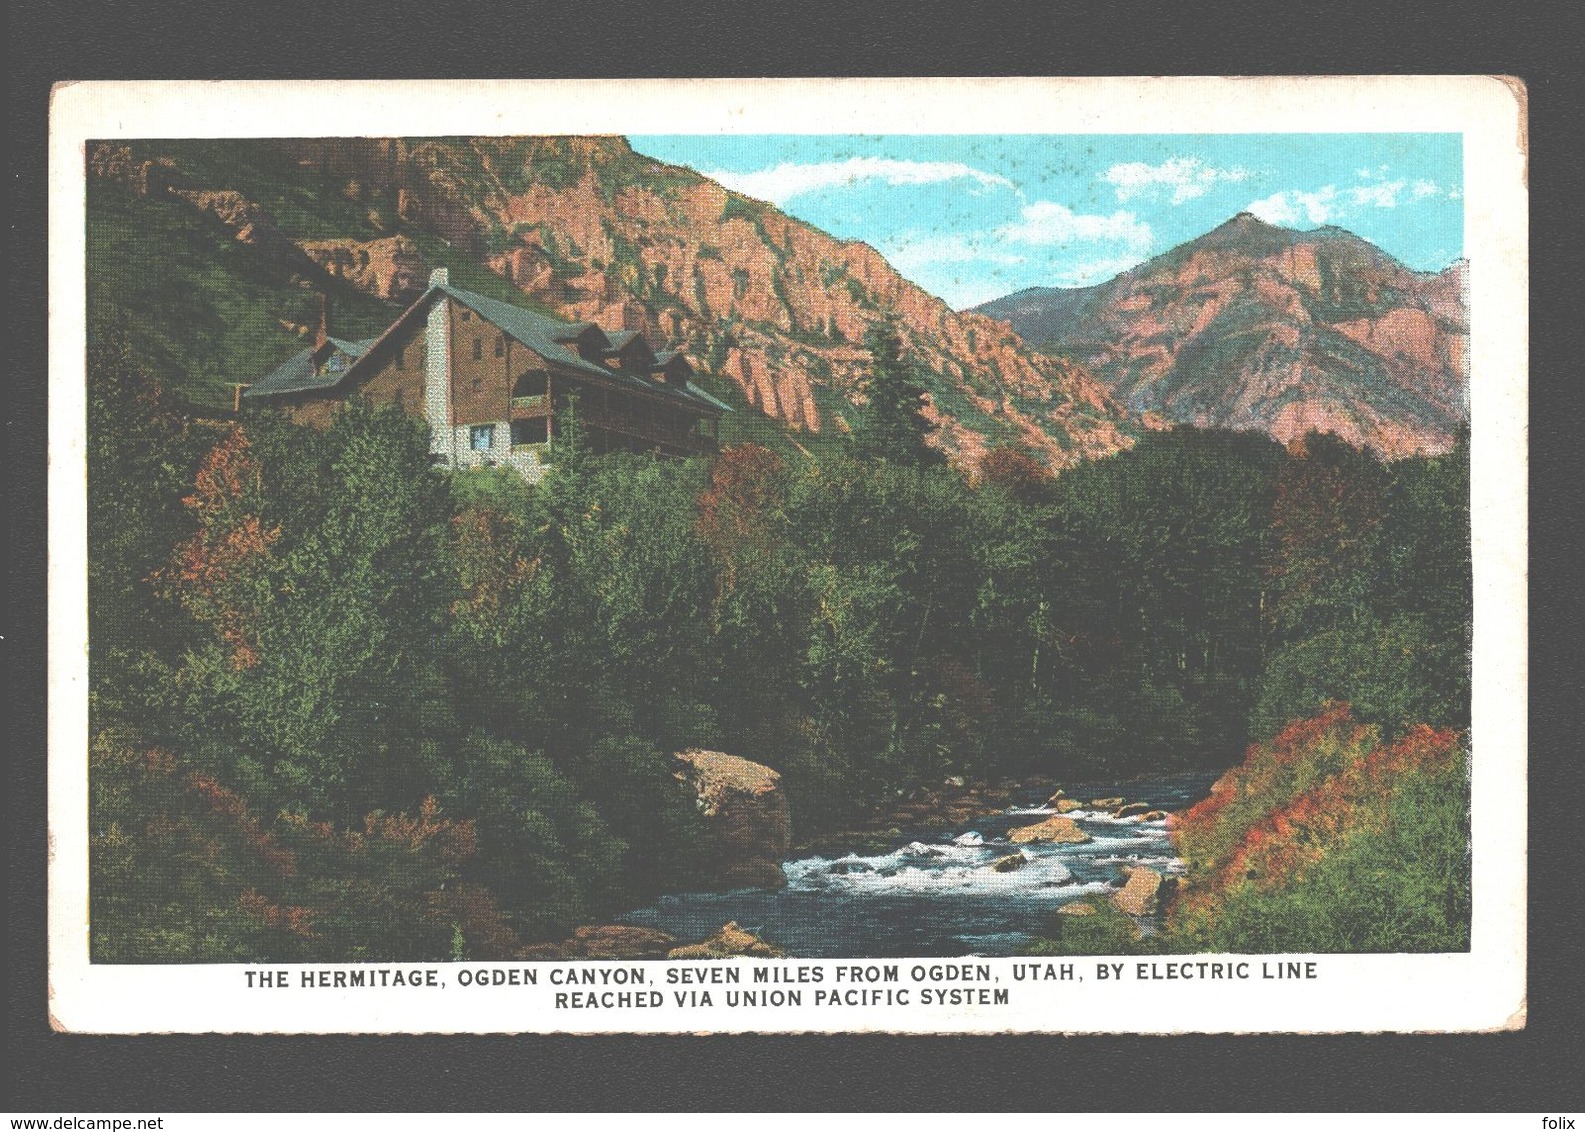 Ogden - The Hermitage, Ogden Canyon, Seven Miles From Ogden, By Electric Line Reached Via Union Pacific System - Ogden